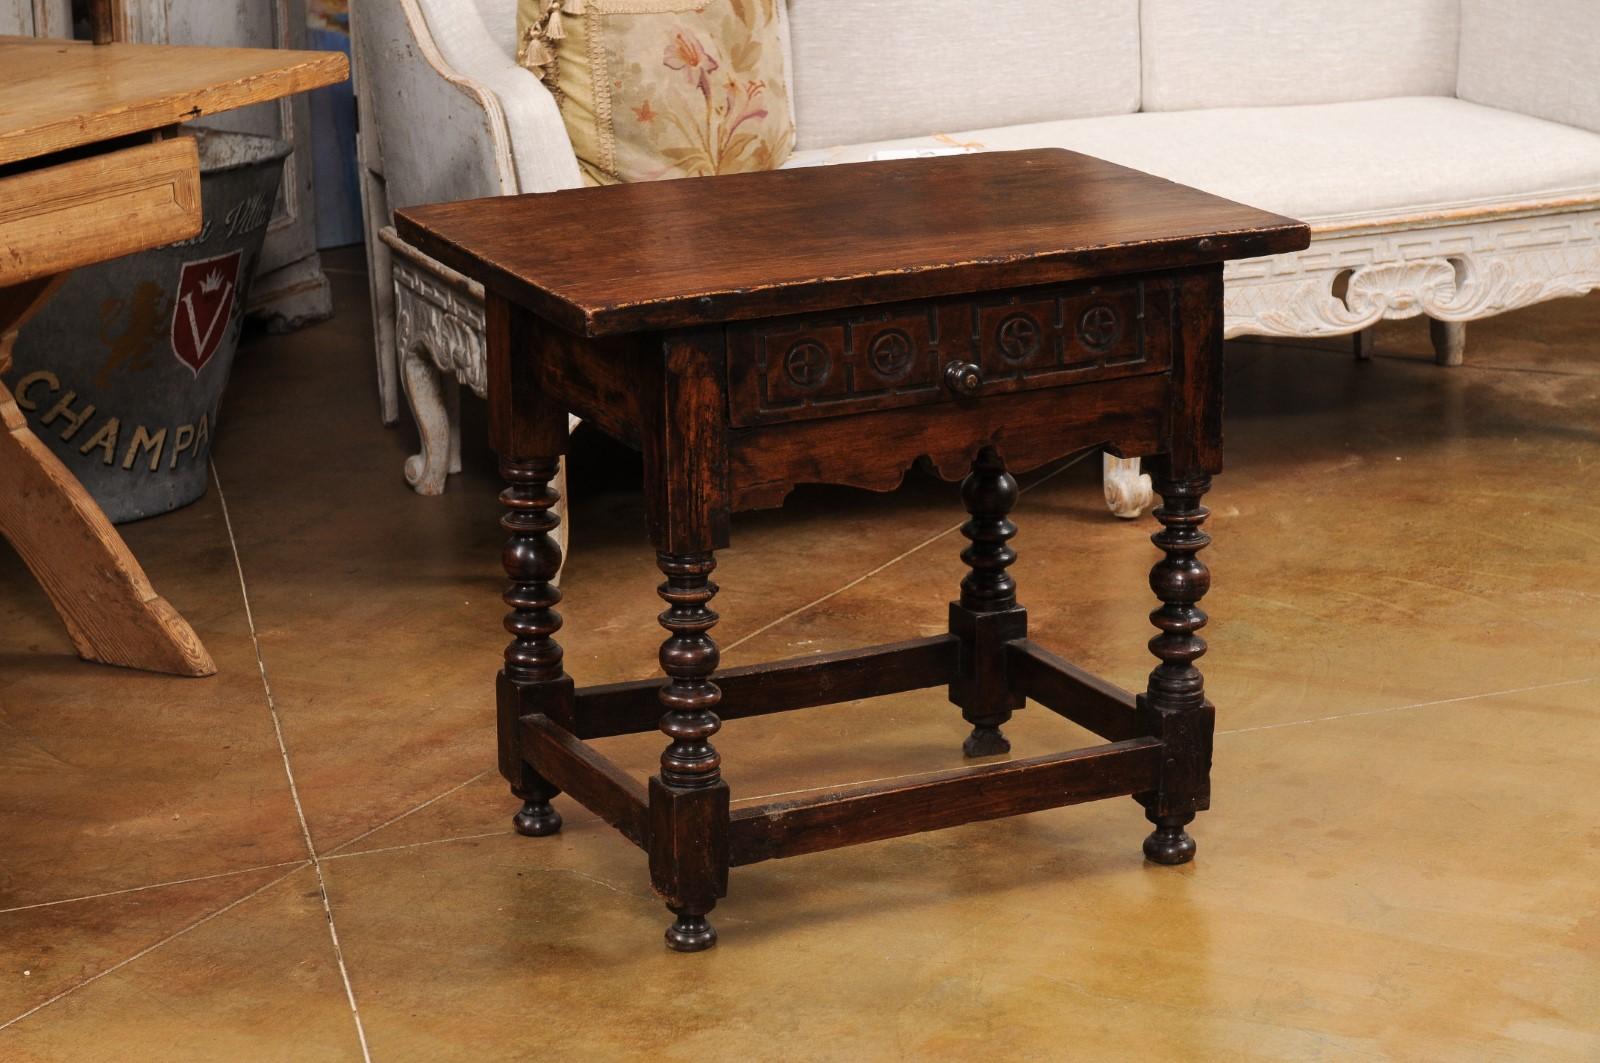 Spanish 1770s Walnut Side Table with Spool Legs and Rosettes Carved Drawer In Good Condition For Sale In Atlanta, GA